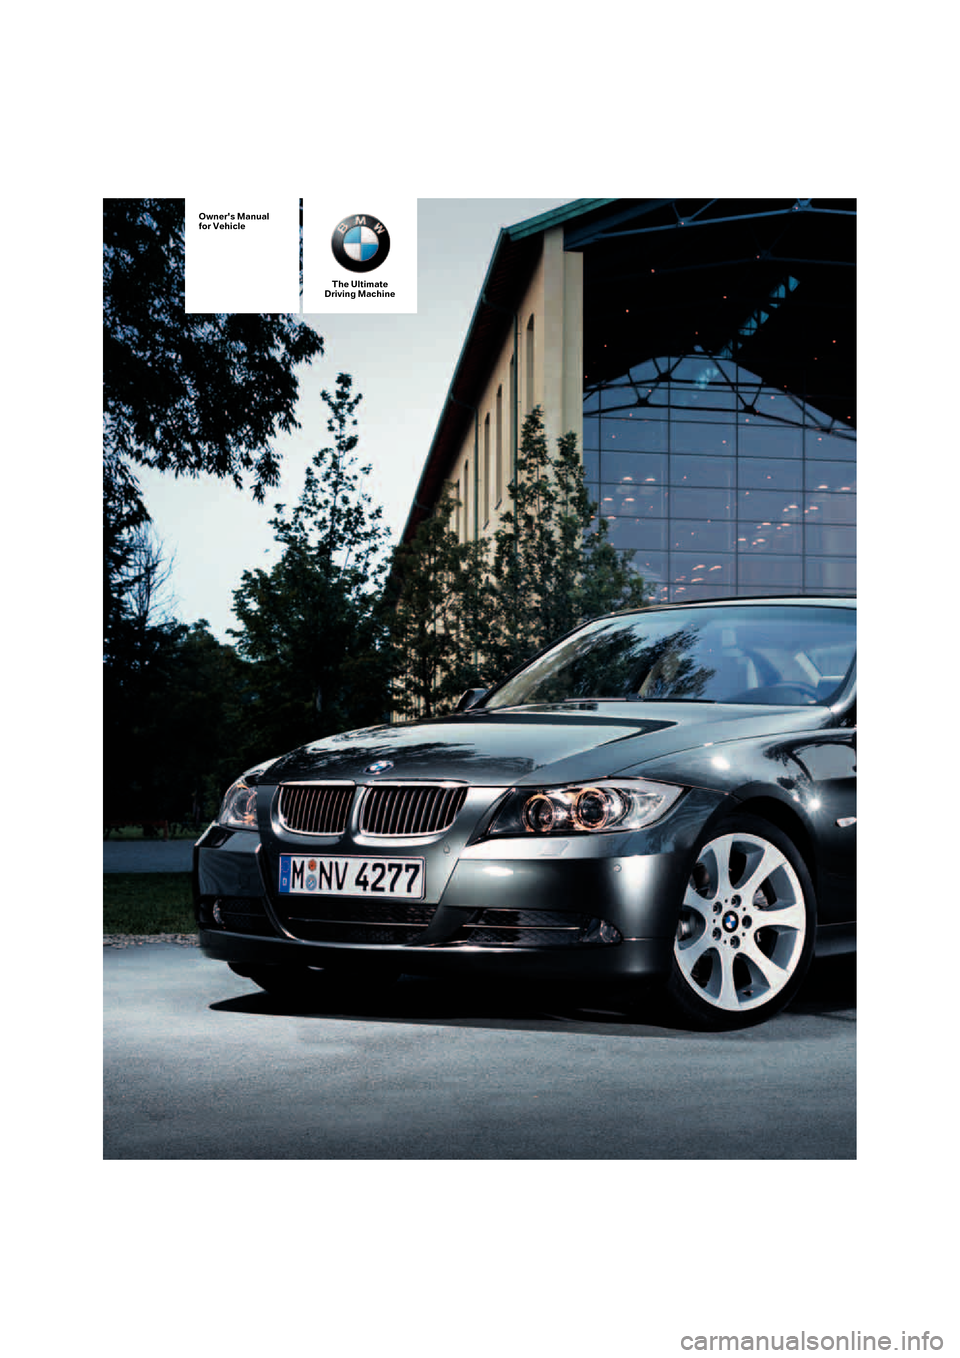 BMW 323I SEDAN 2008 E90 Owners Manual The Ultimate
Driving Machine
Owners Manual
for Vehicle 